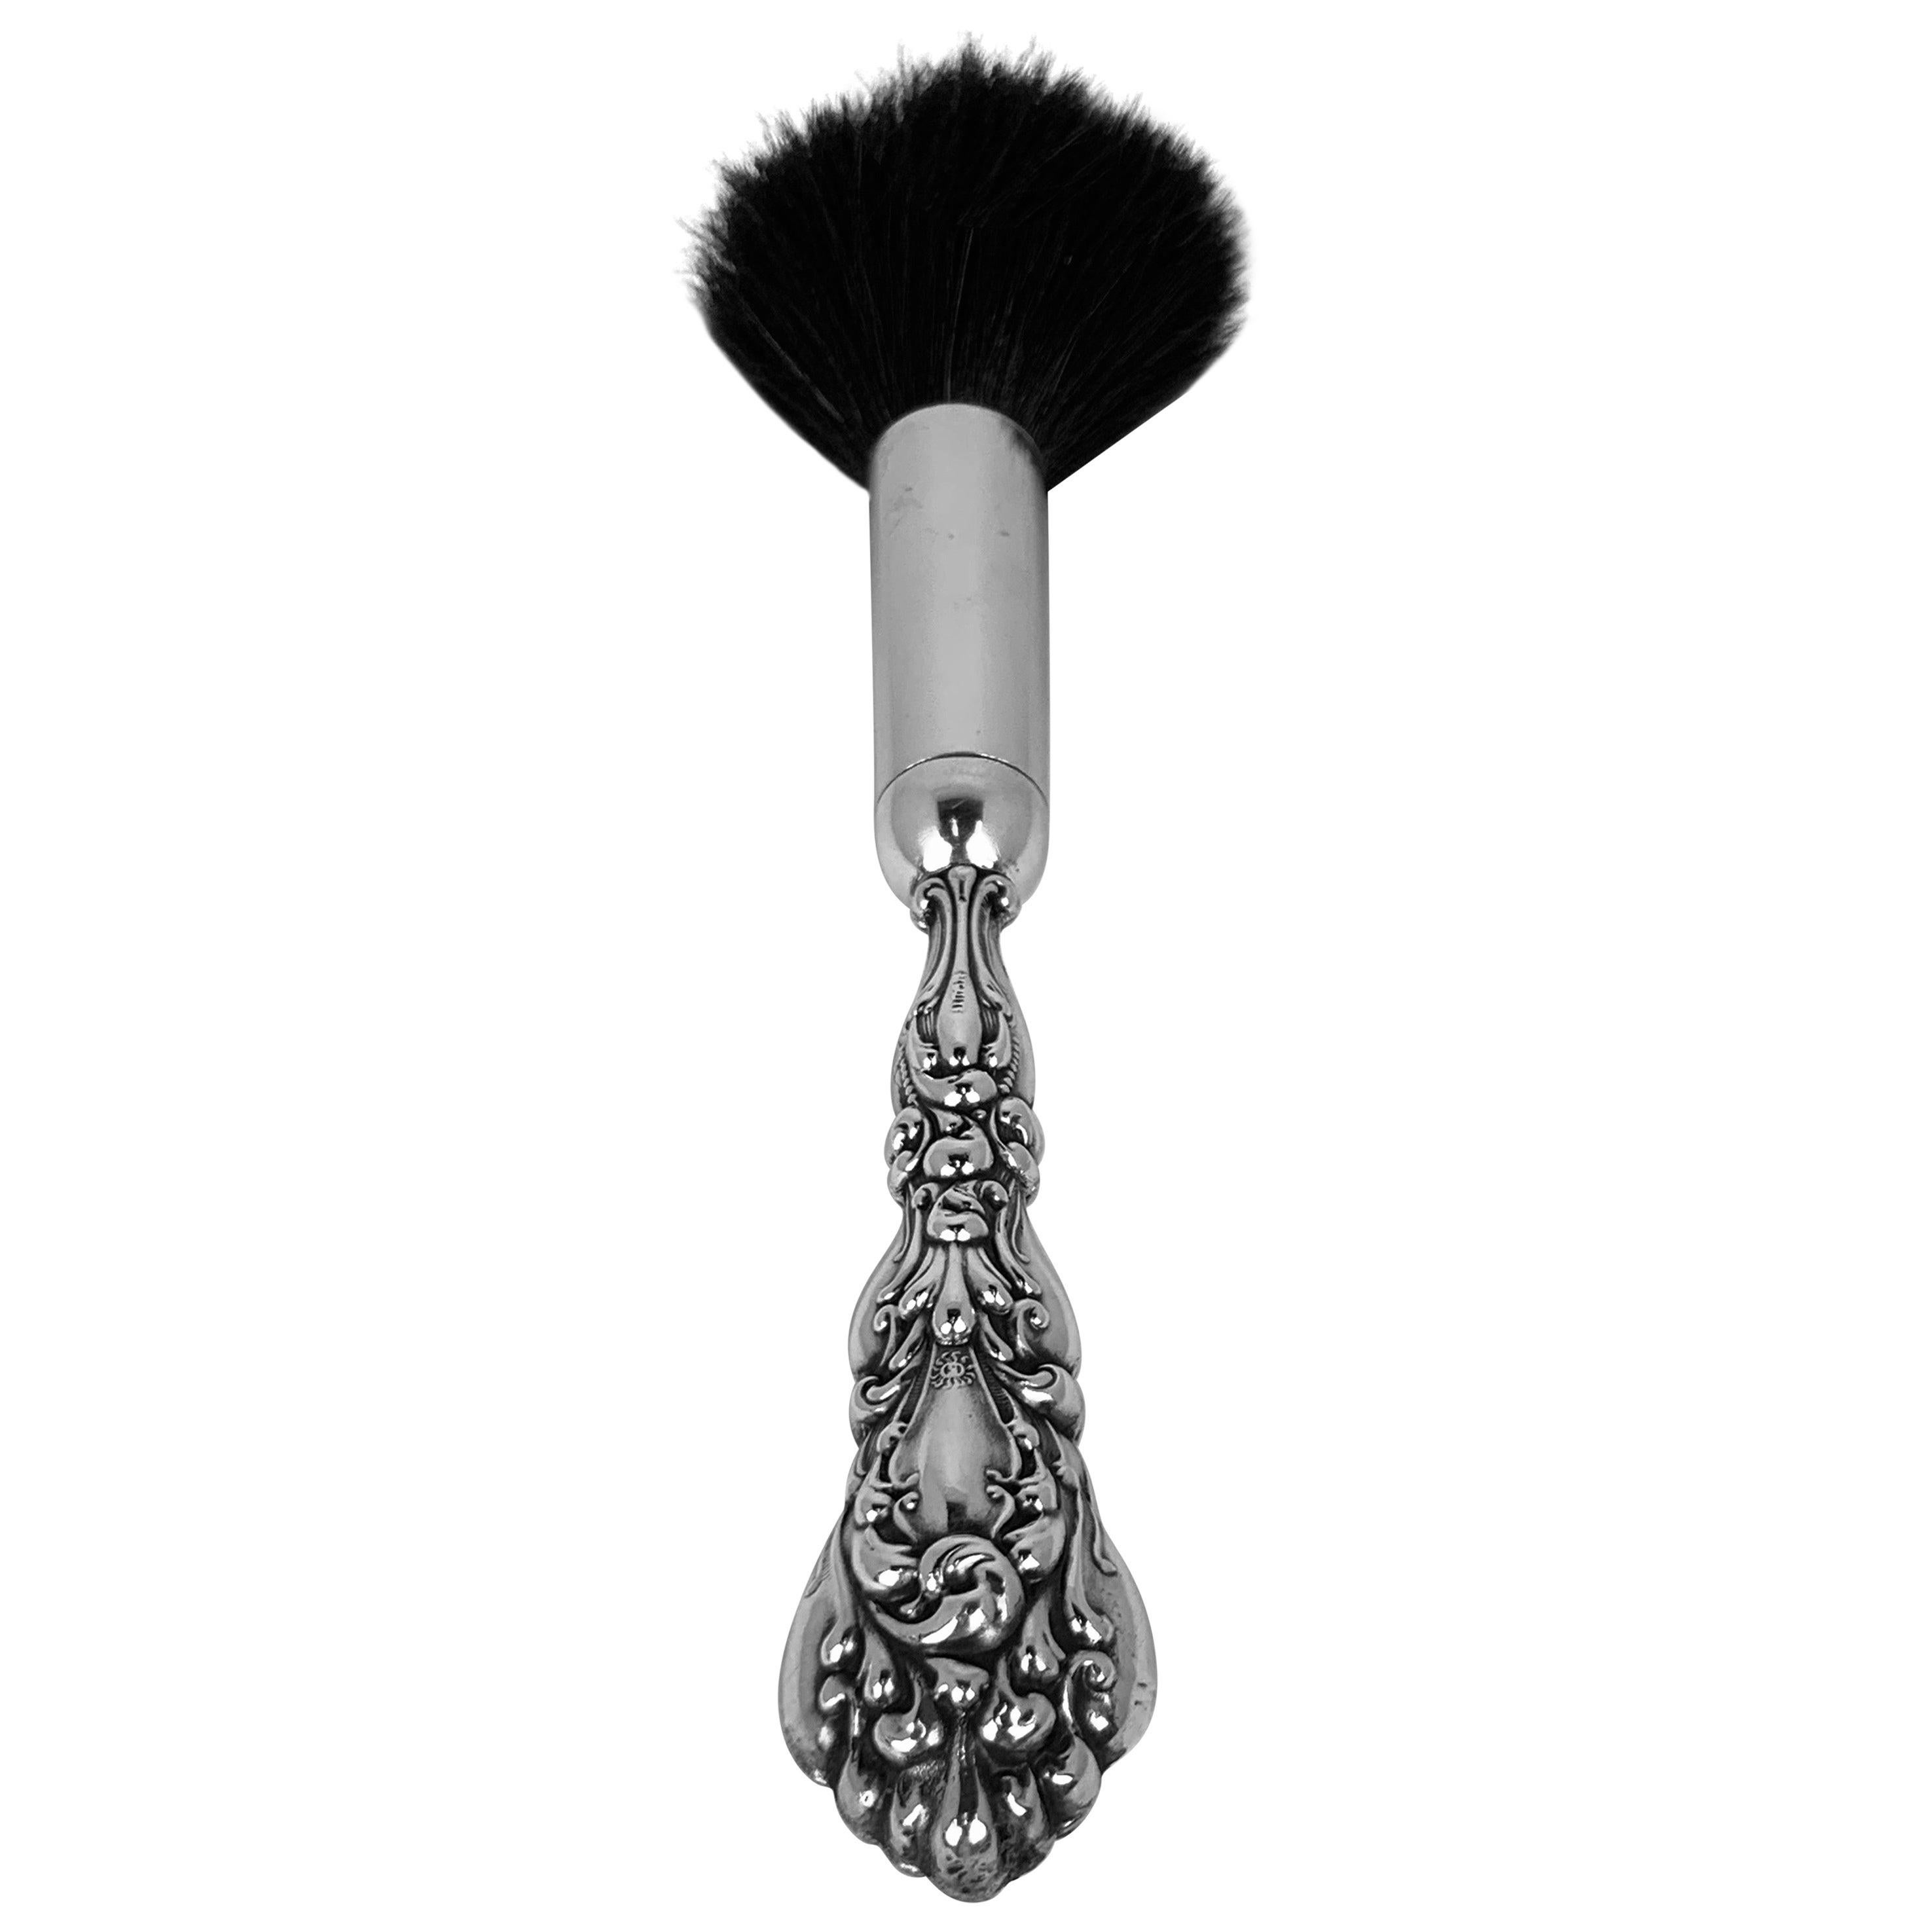 Make-Up Brush with a Sterling Silver Repoussé Hande,  American, 19th c. 